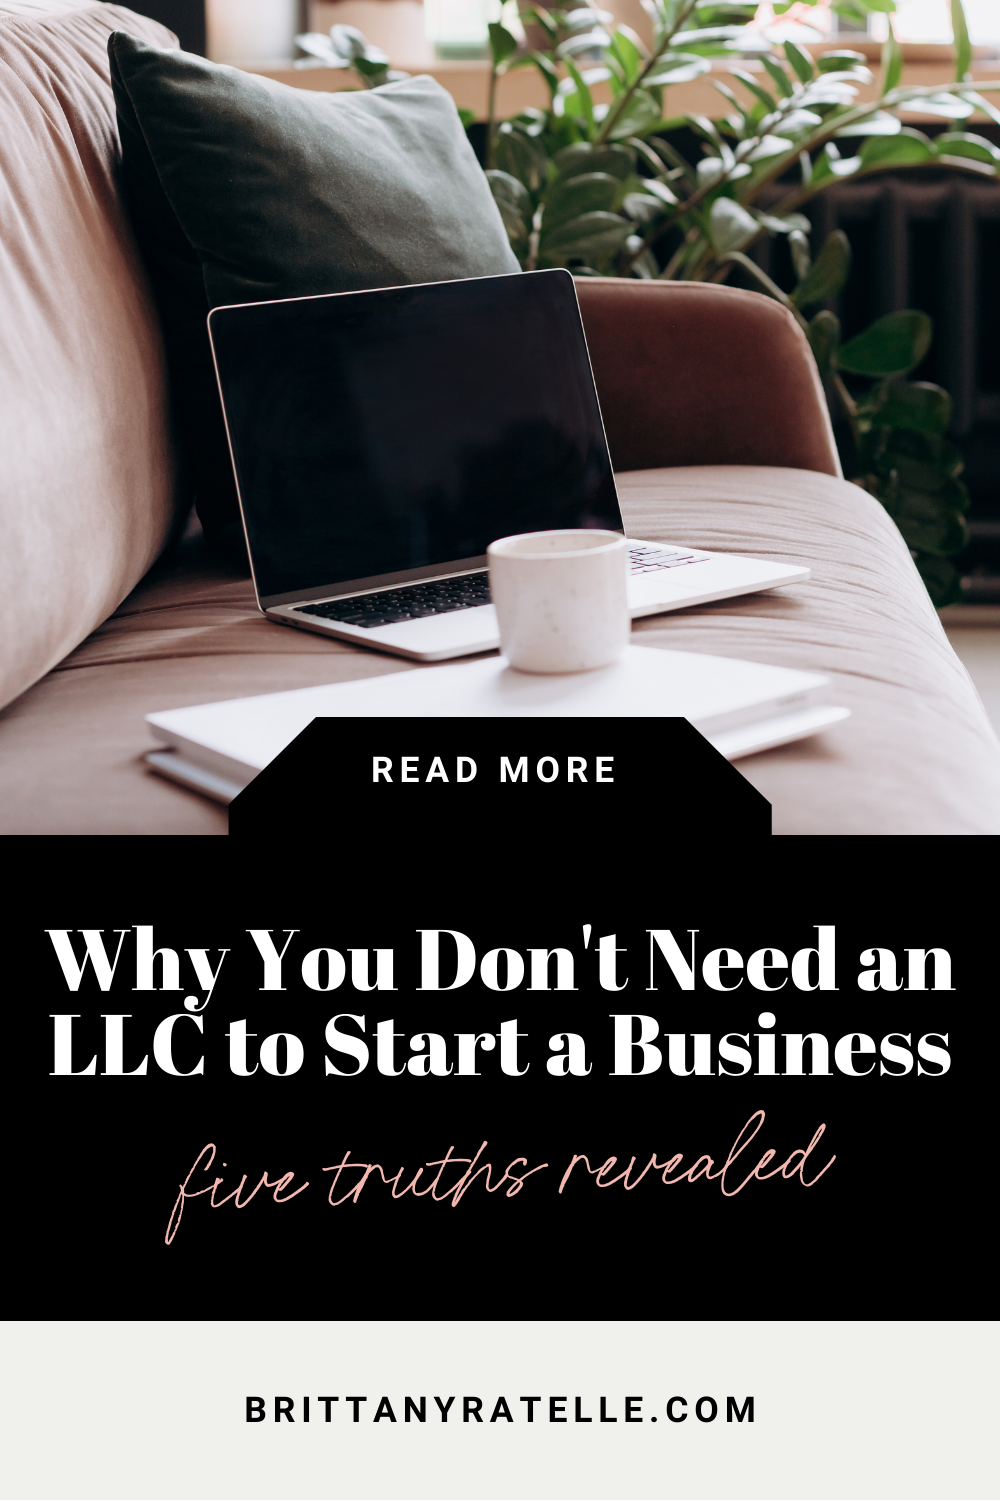 Why You Don’t Need an LLC to Start a Business. www.brittanyratelle.com